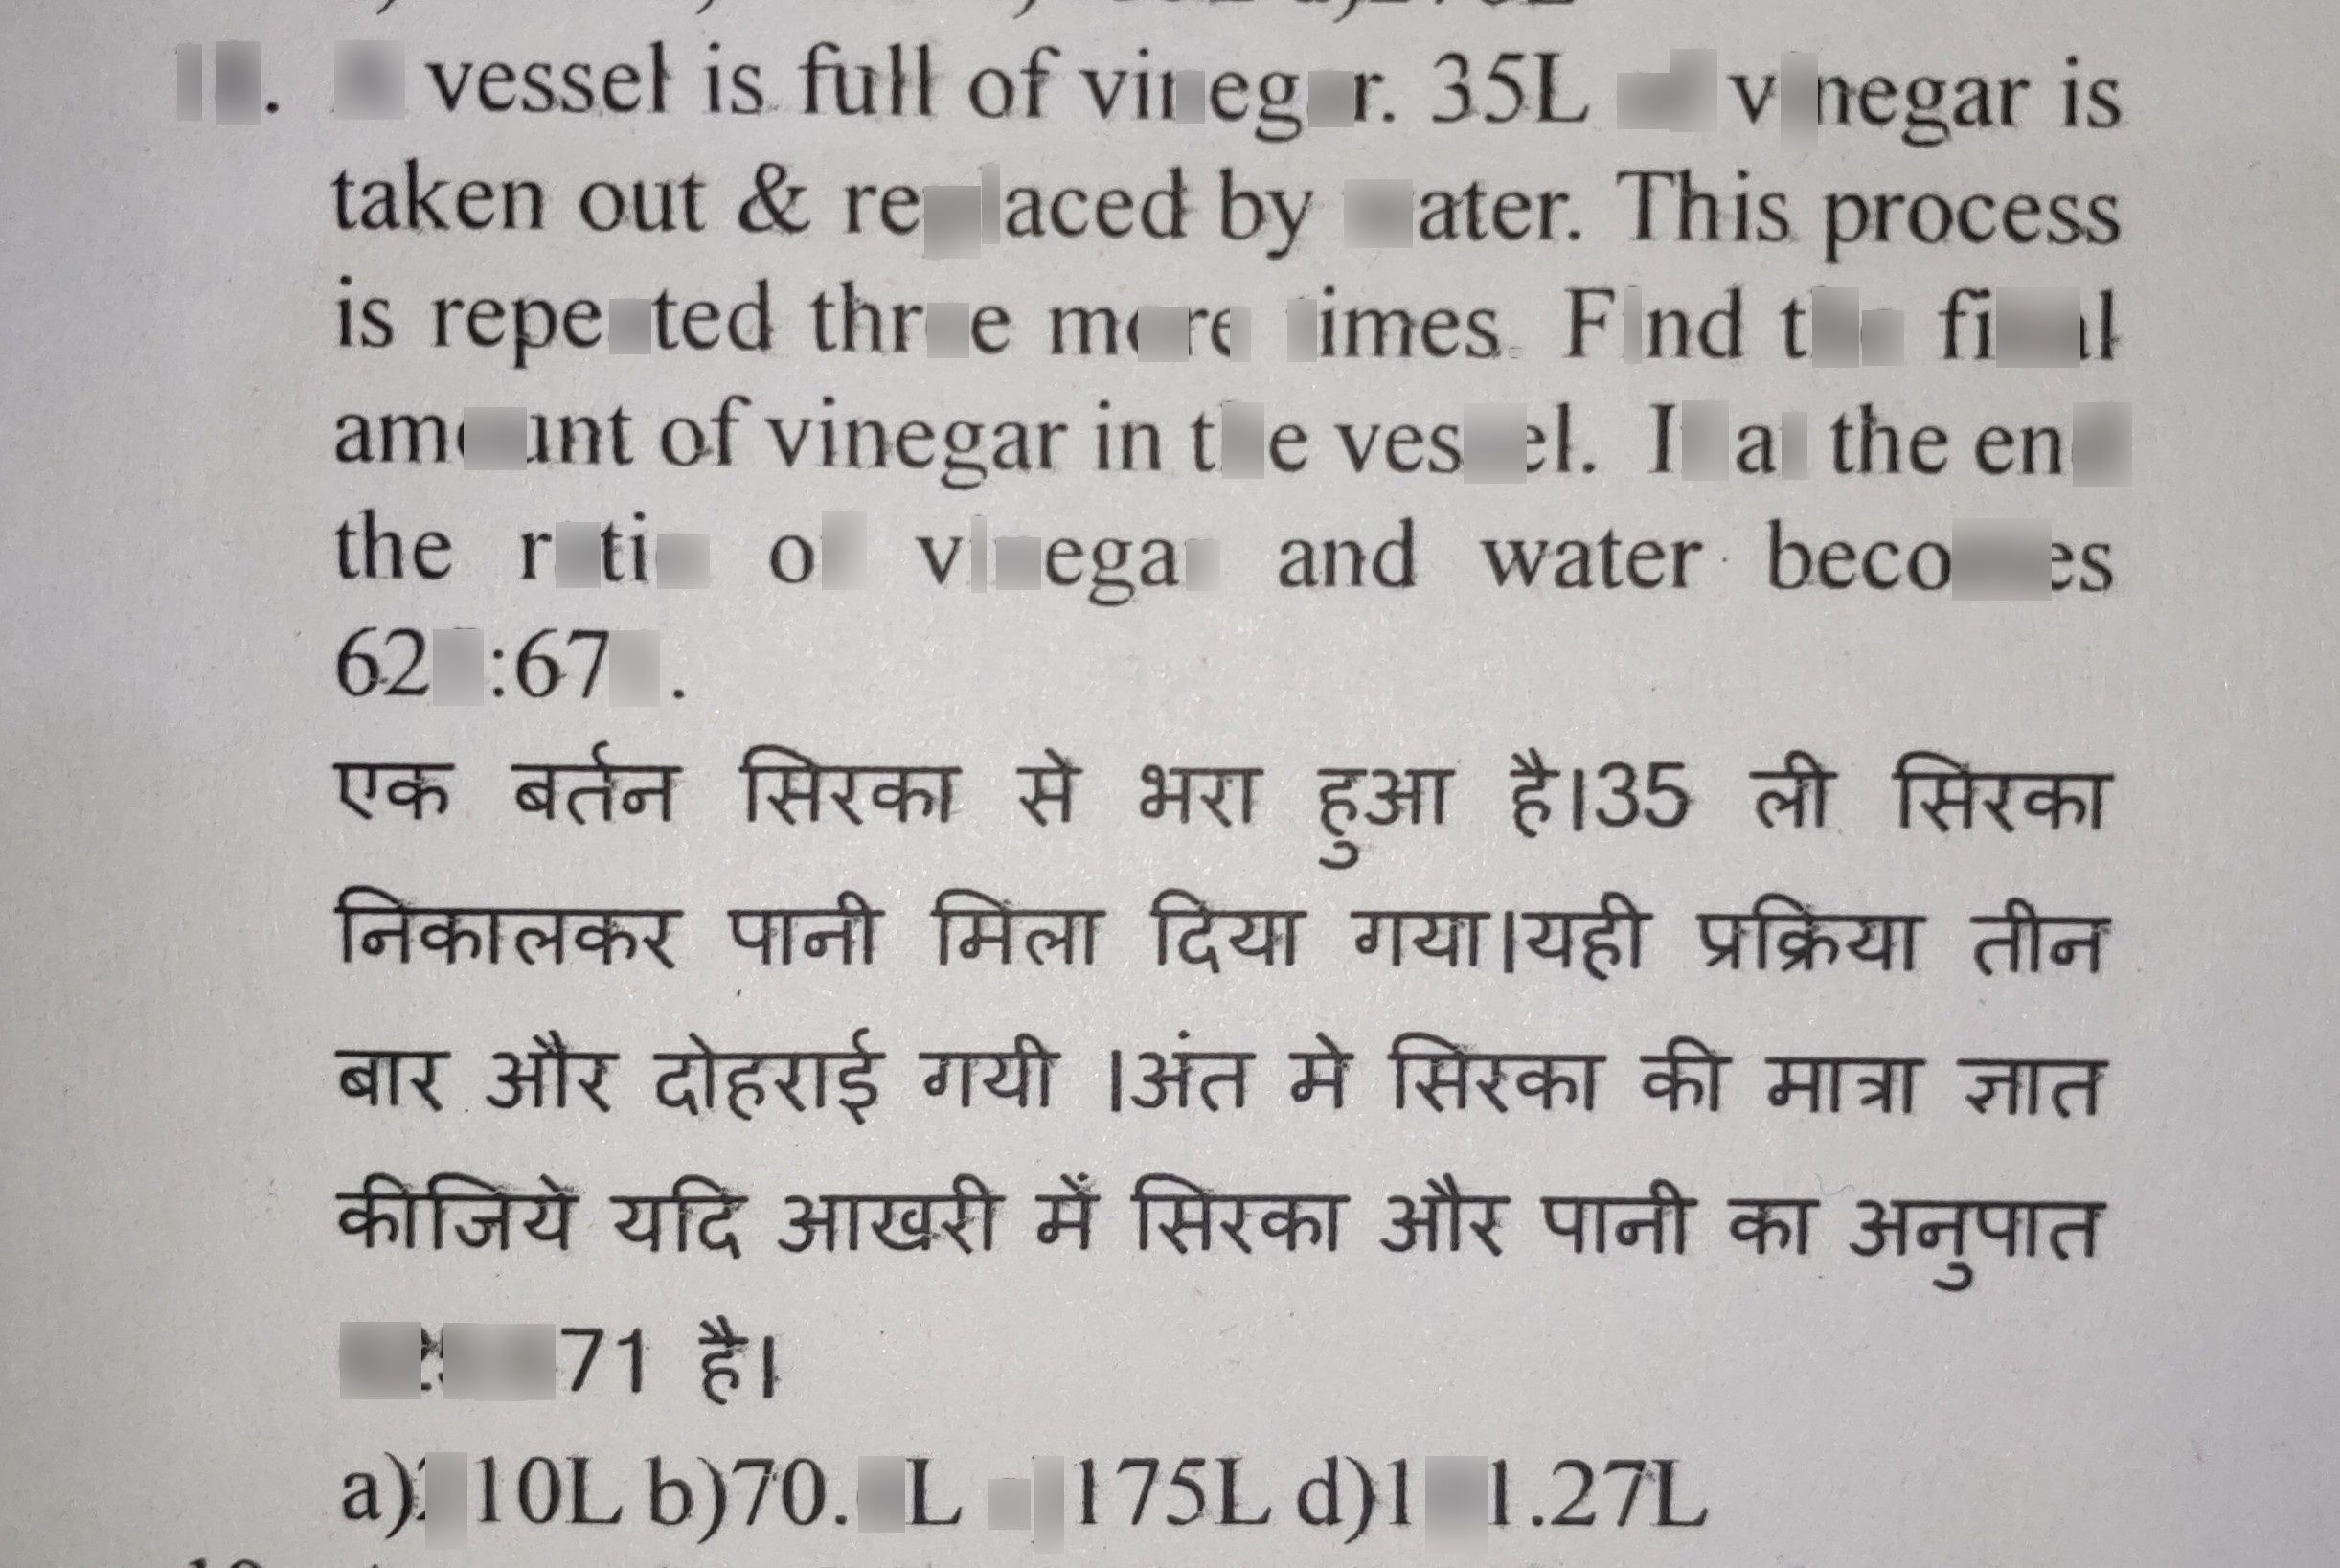 search-thumbnail-$18.$ $A$ vessel is full of vinegar. $35L$ of vinegar is 
taken out & replaced by water. This process 
is repeated three more times. Find the final 
amount of vinegar in the vessel. If at the end 
the ratio of vinegar and water becomes 
$625:671$ 
$135$ 

$1$ 
$39$ $5$ 
$625.671$ 
$a\right)210Lb\right)70.6Lc\right)175L$ $d\right)101.27L$ 